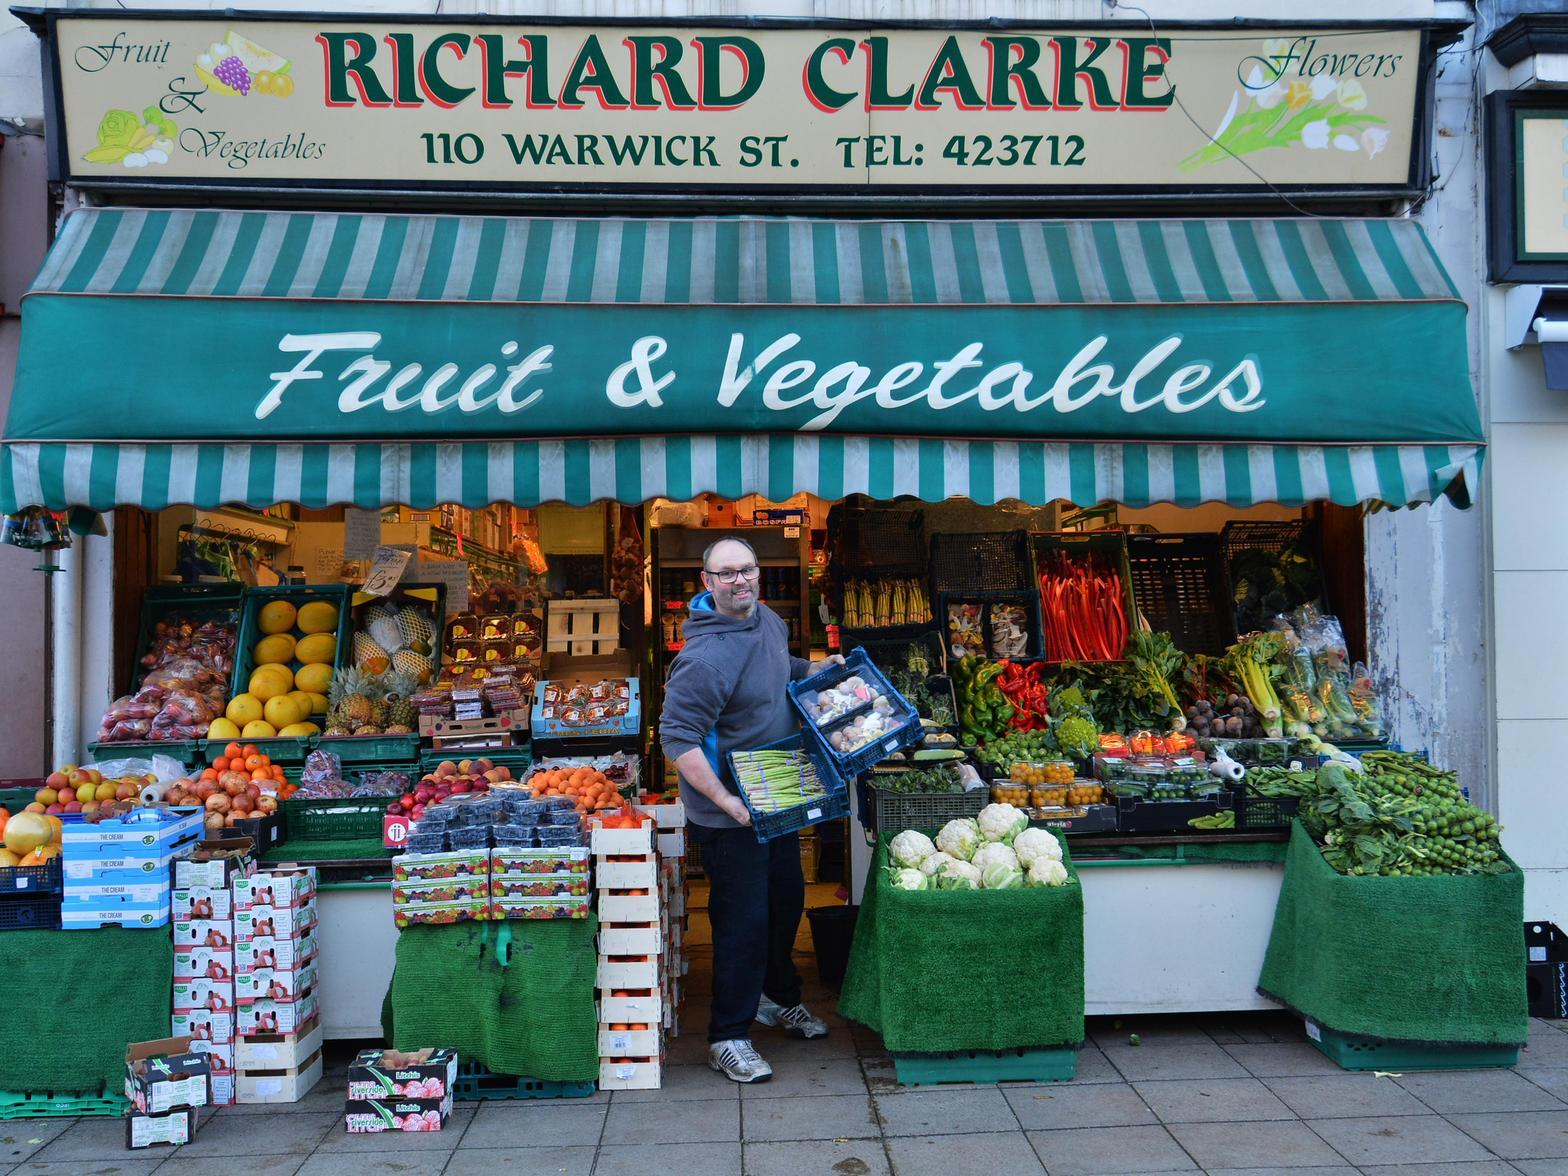 After nearly 40 years, dedicated Leamington greengrocer Richard Clarke said a heartfelt thank you to his supporter club of customers after closing his store for the last time in the spring. Richard had worked at the family business at 110 Warwick Street from the age of 14 in 1980 and took over from his brother as the owner a few years later.